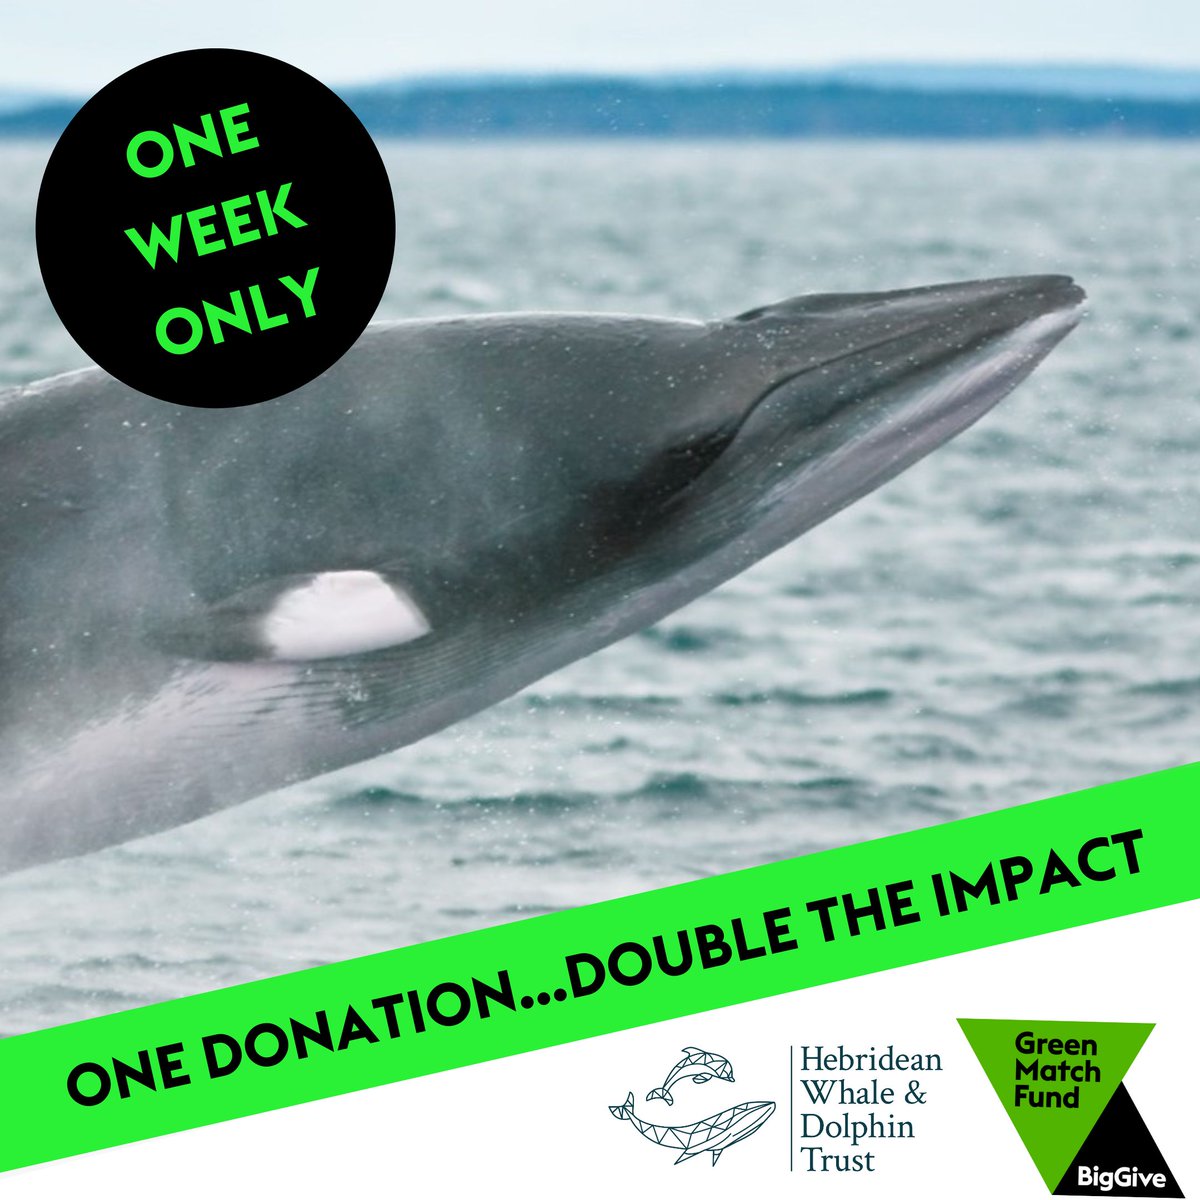 🐋 Whale Track: people power for conservation. The Big Green Give Green Match Fund is LIVE! For one week, every £1 you donate will be DOUBLED. Donate now to ensure our Whale Track community can continue to protect whales and dolphins in Scottish seas. donate.biggive.org/campaign/a0569…